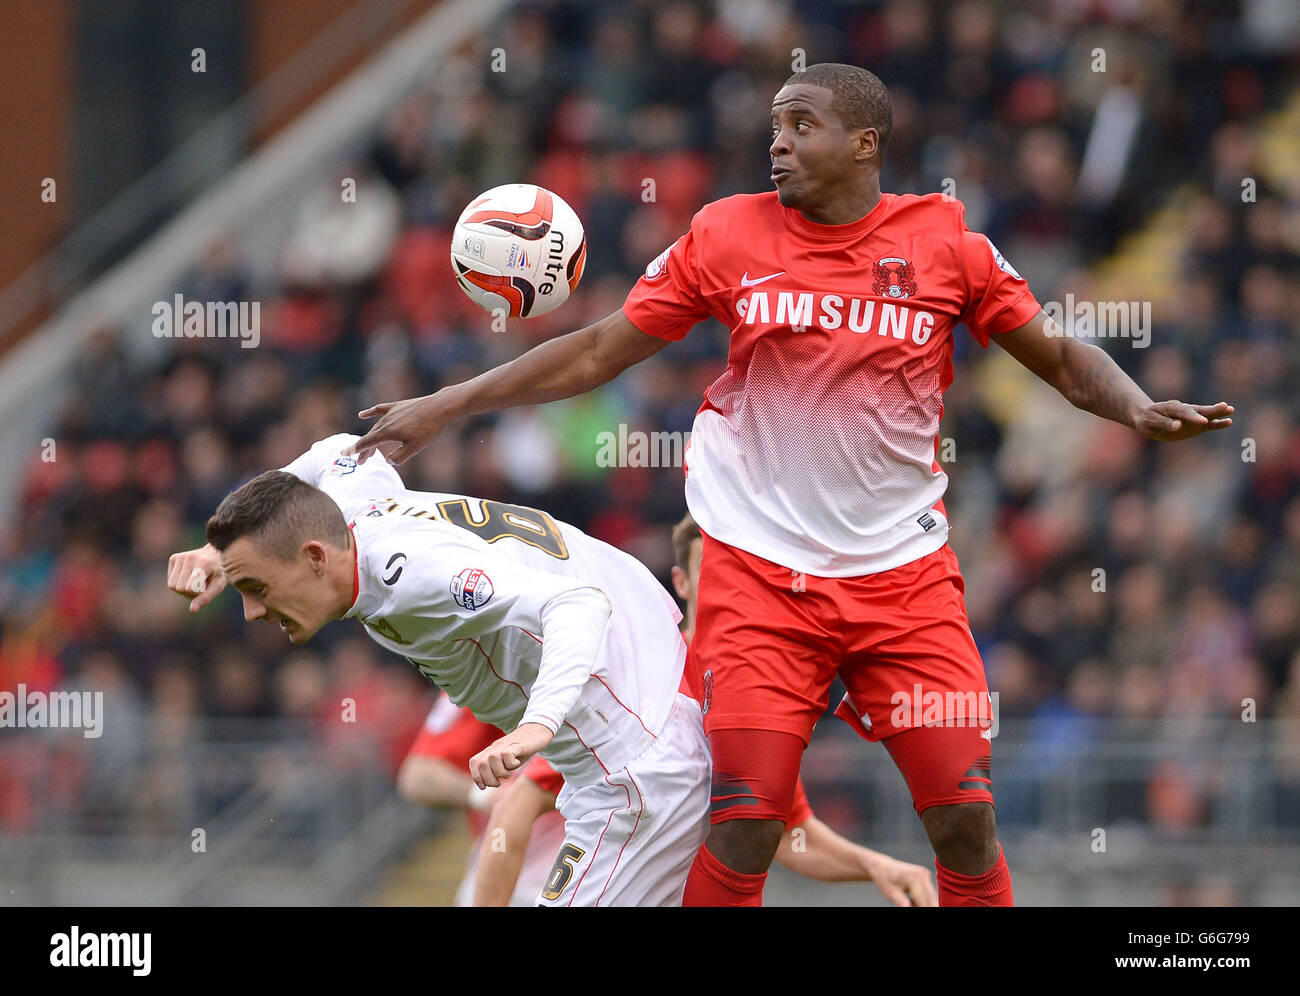 Leyton Orient's Kevin Lisbie (right) out jumps MK Dons' Shaun Williams during the Sky Bet League One match at the Matchroom Stadium, London. Stock Photo